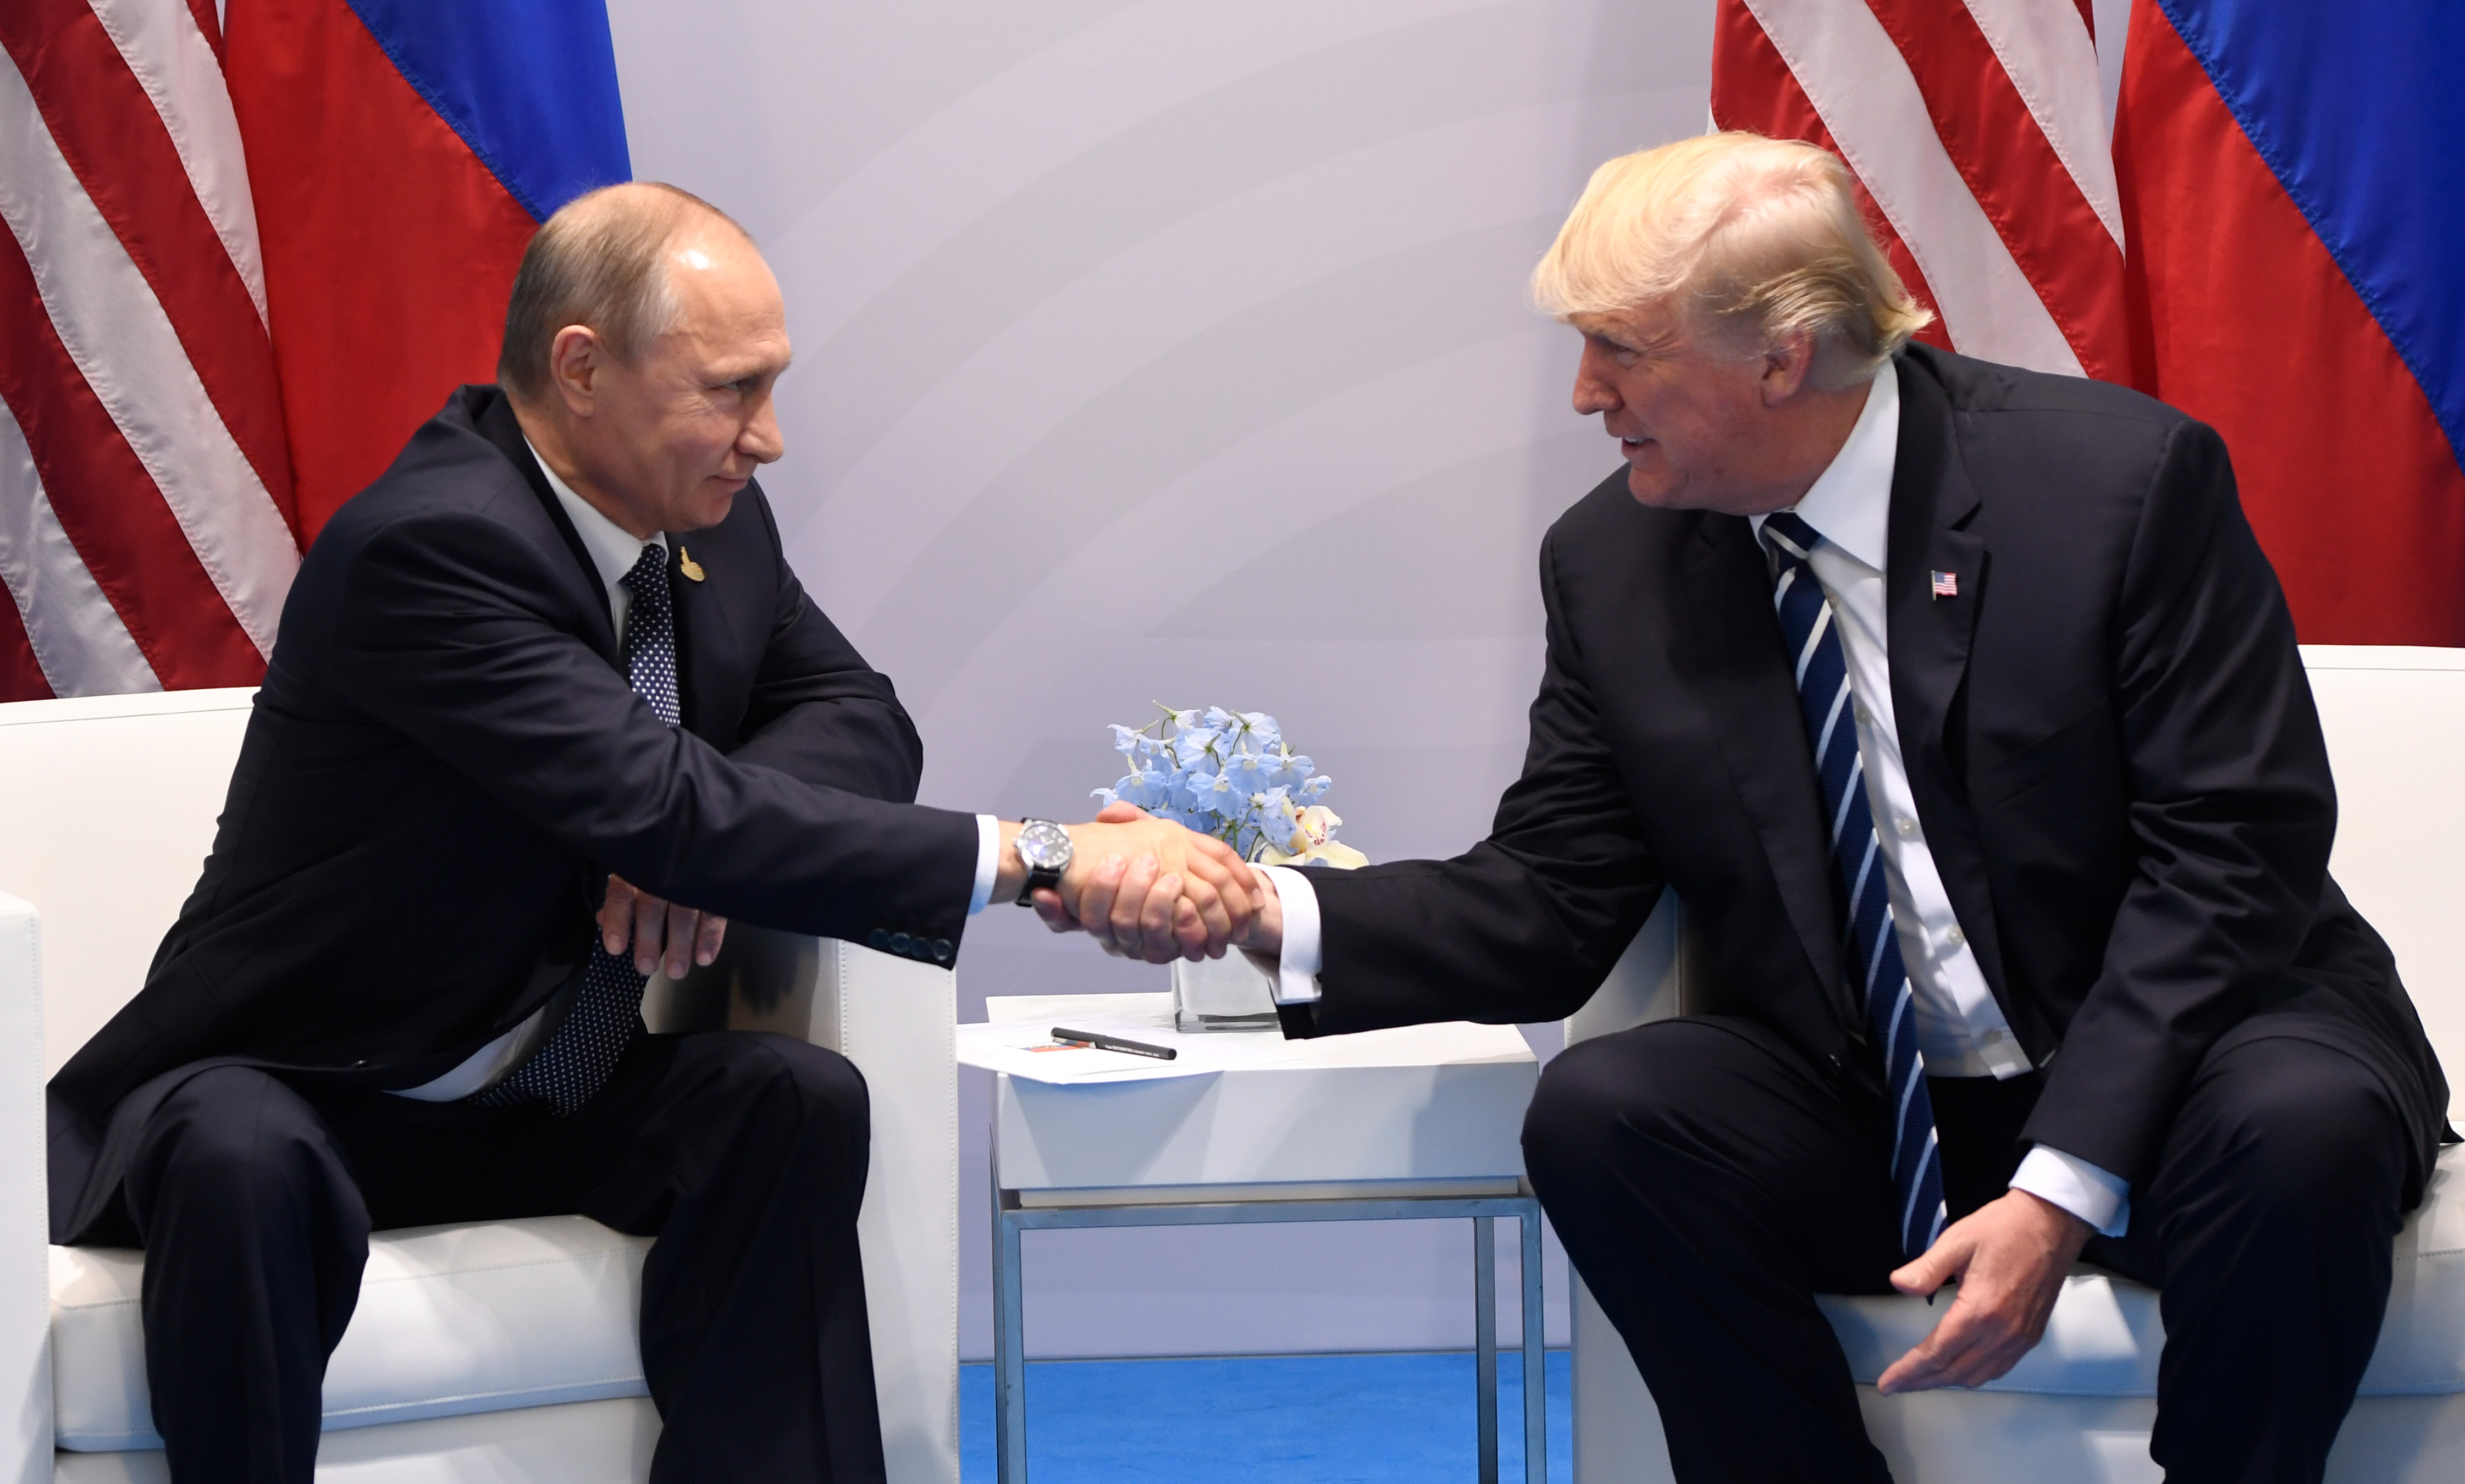 President Donald Trump and Russia's President Vladimir Putin shake hands during a meeting on the sidelines of the G20 Summit in Hamburg, Germany, on July 7, 2017. (SAUL LOEB—AFP/Getty Images)